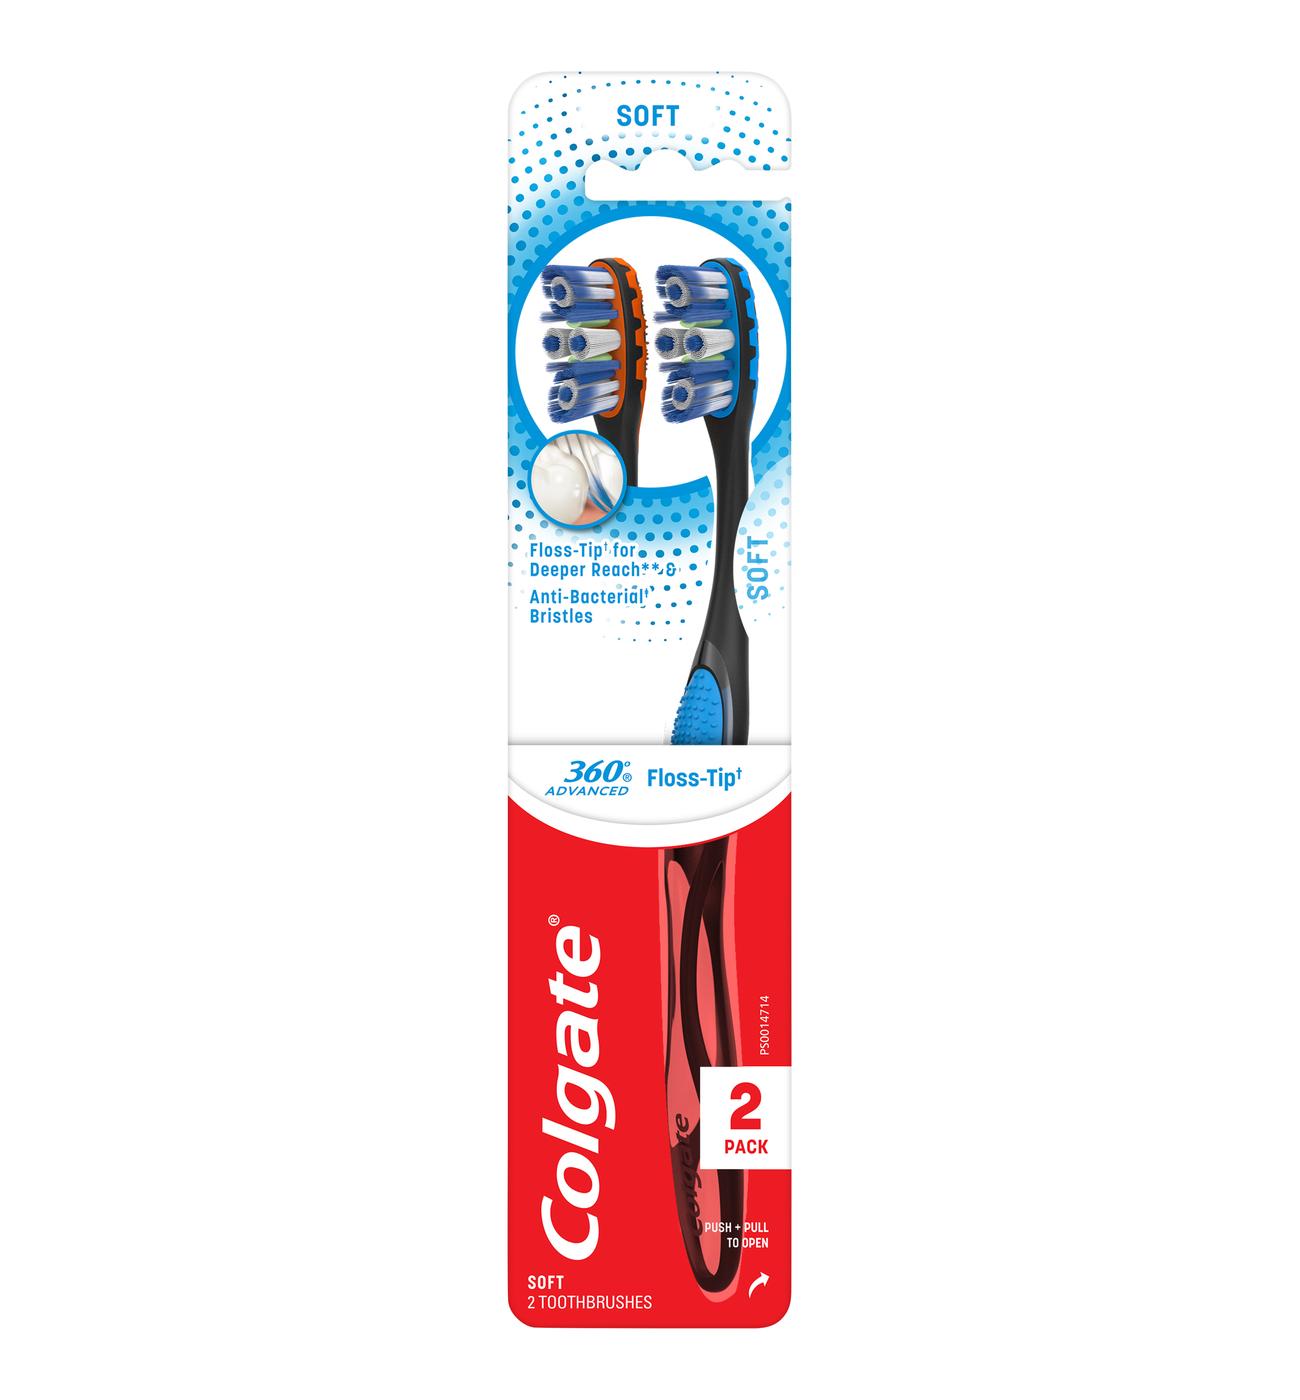 Colgate 360 Advanced Floss Tip Toothbrushes - Soft; image 1 of 5